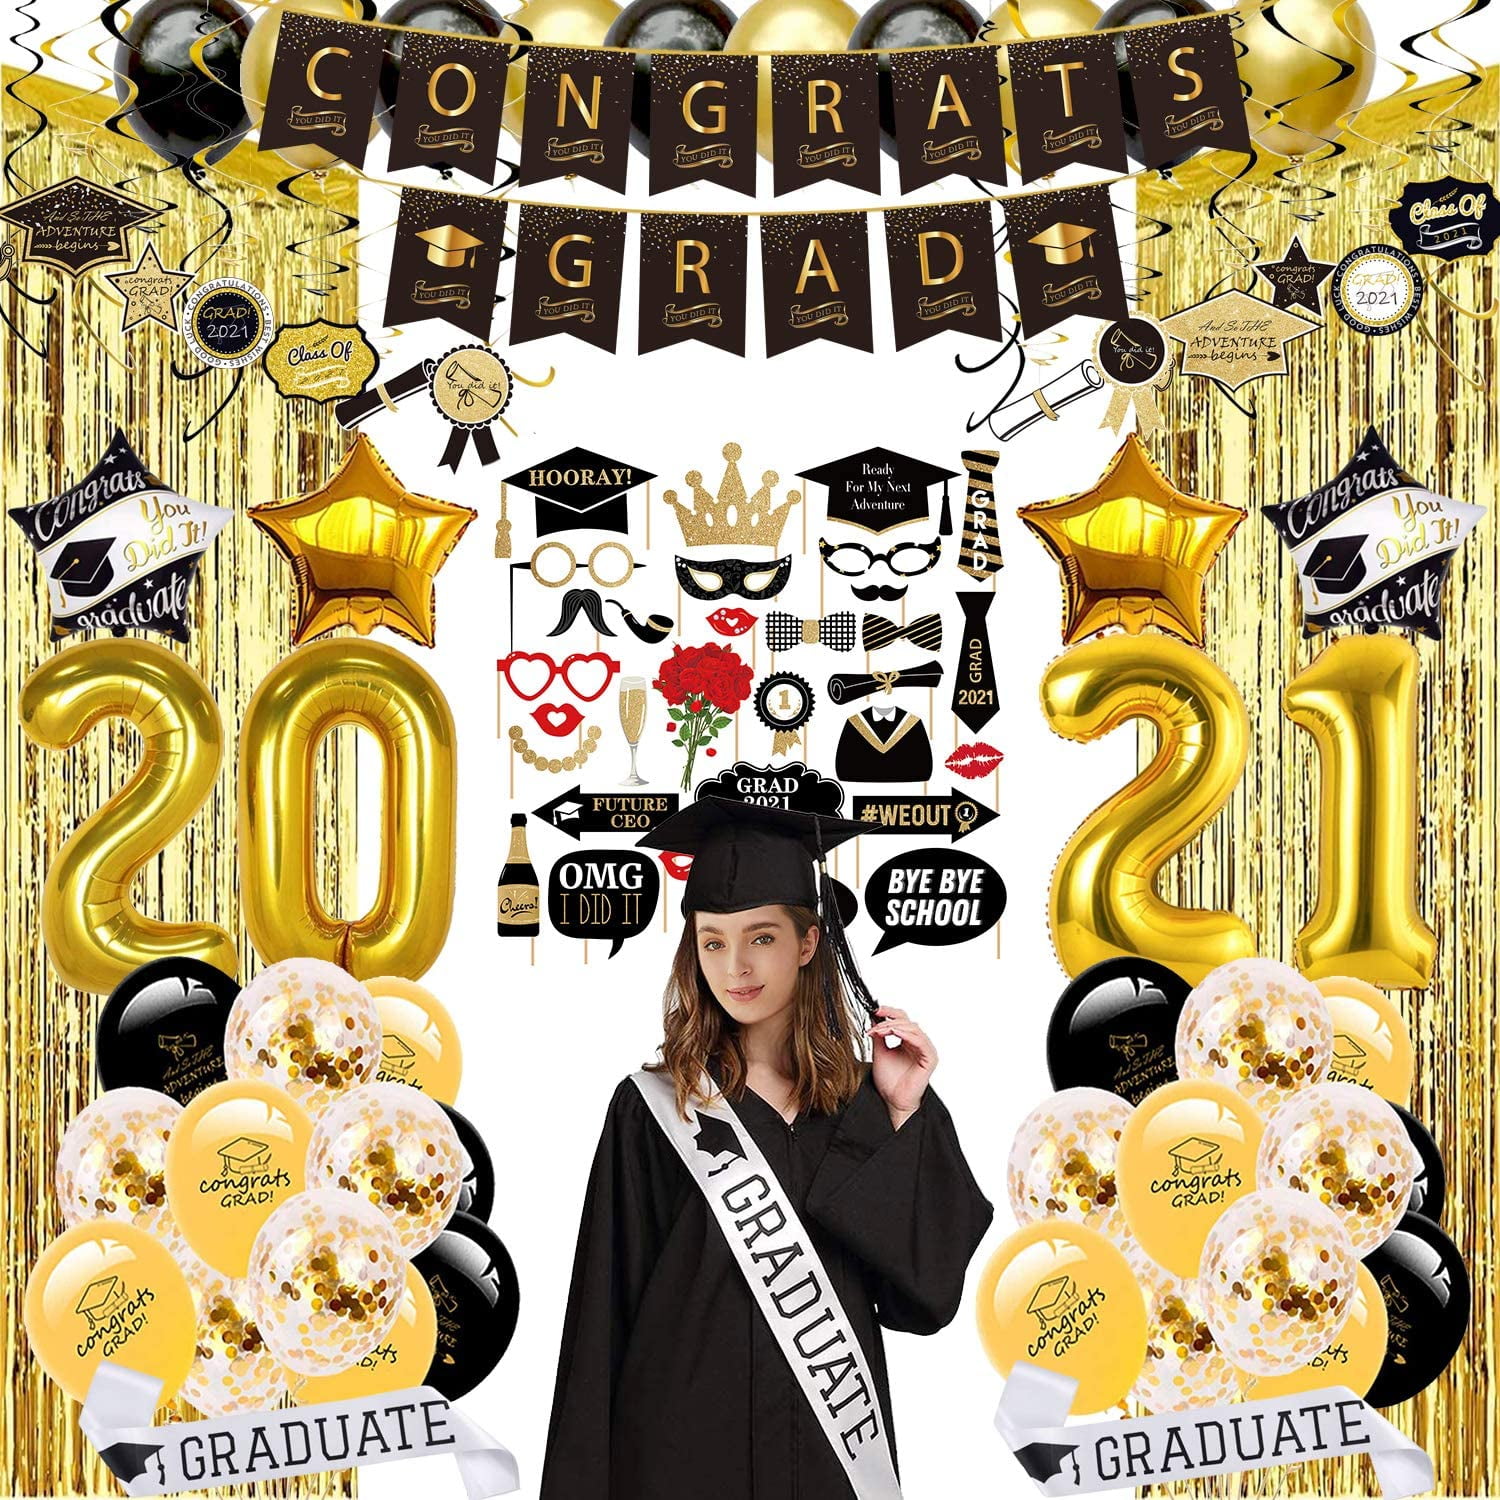 Graduation Photo Booth Props Class of 2020 Graduation Decor 2020 Graduate Graduation Party Graduation Party Props